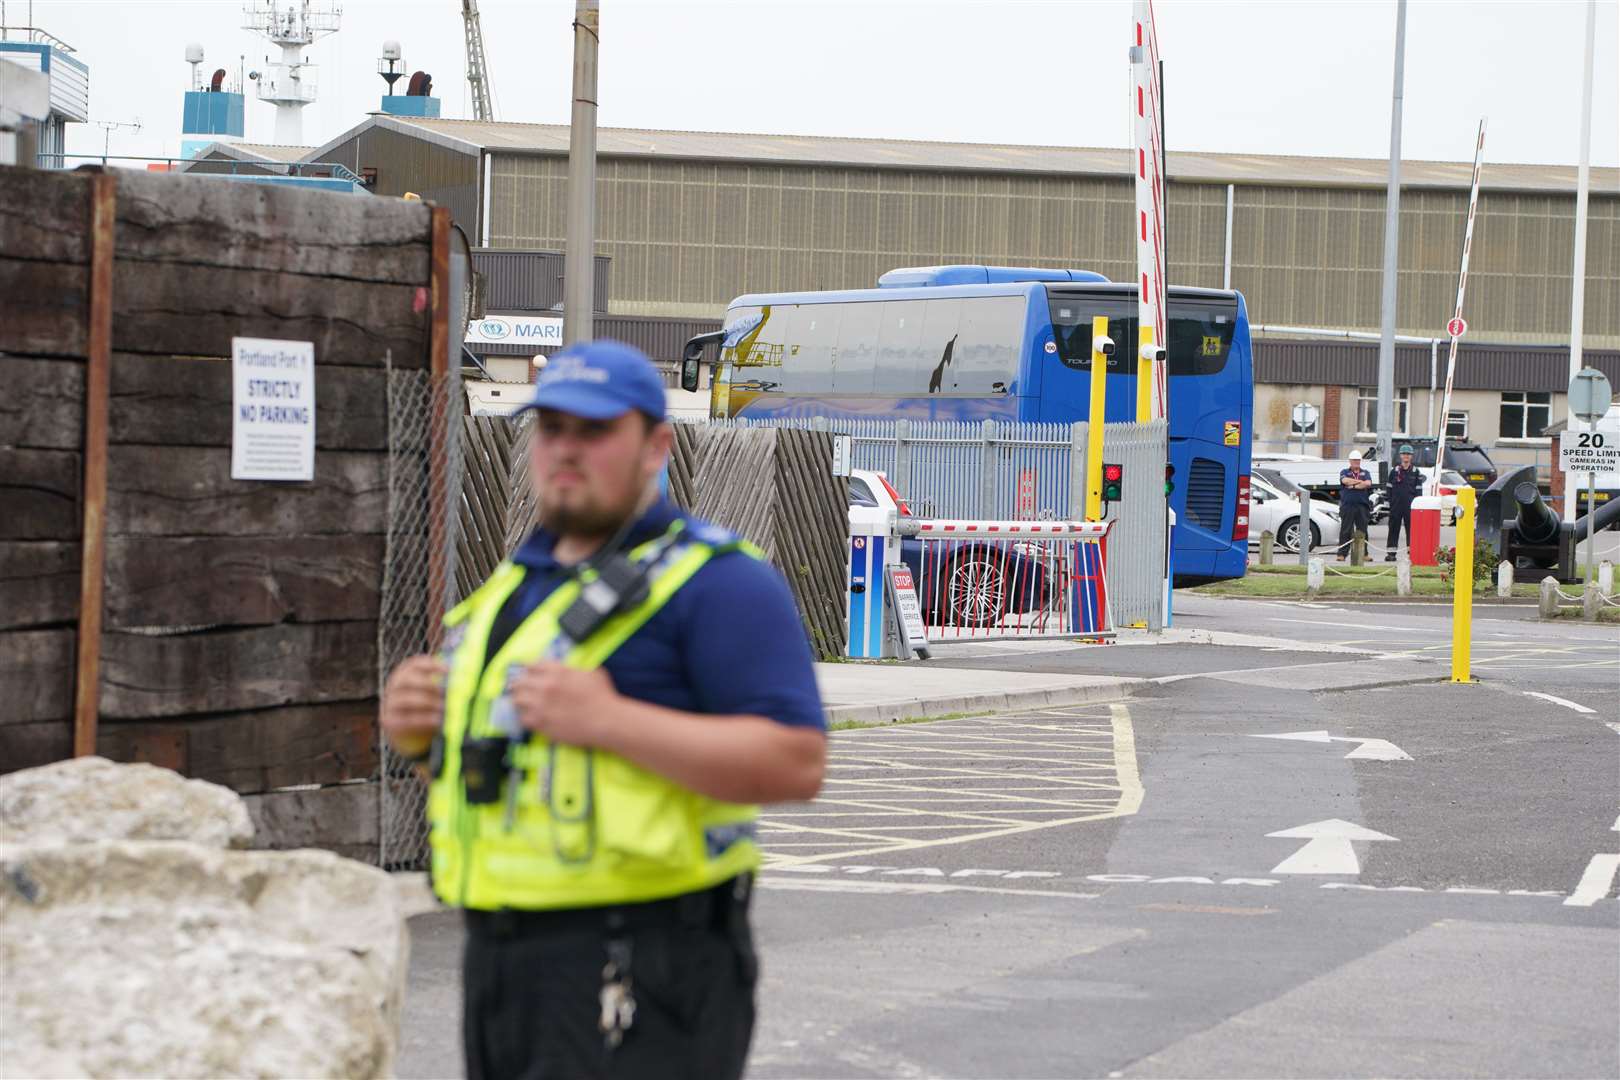 A coach believed to be carrying asylum seekers arrives at Portland Port in Dorset (Ben Birchall/PA)